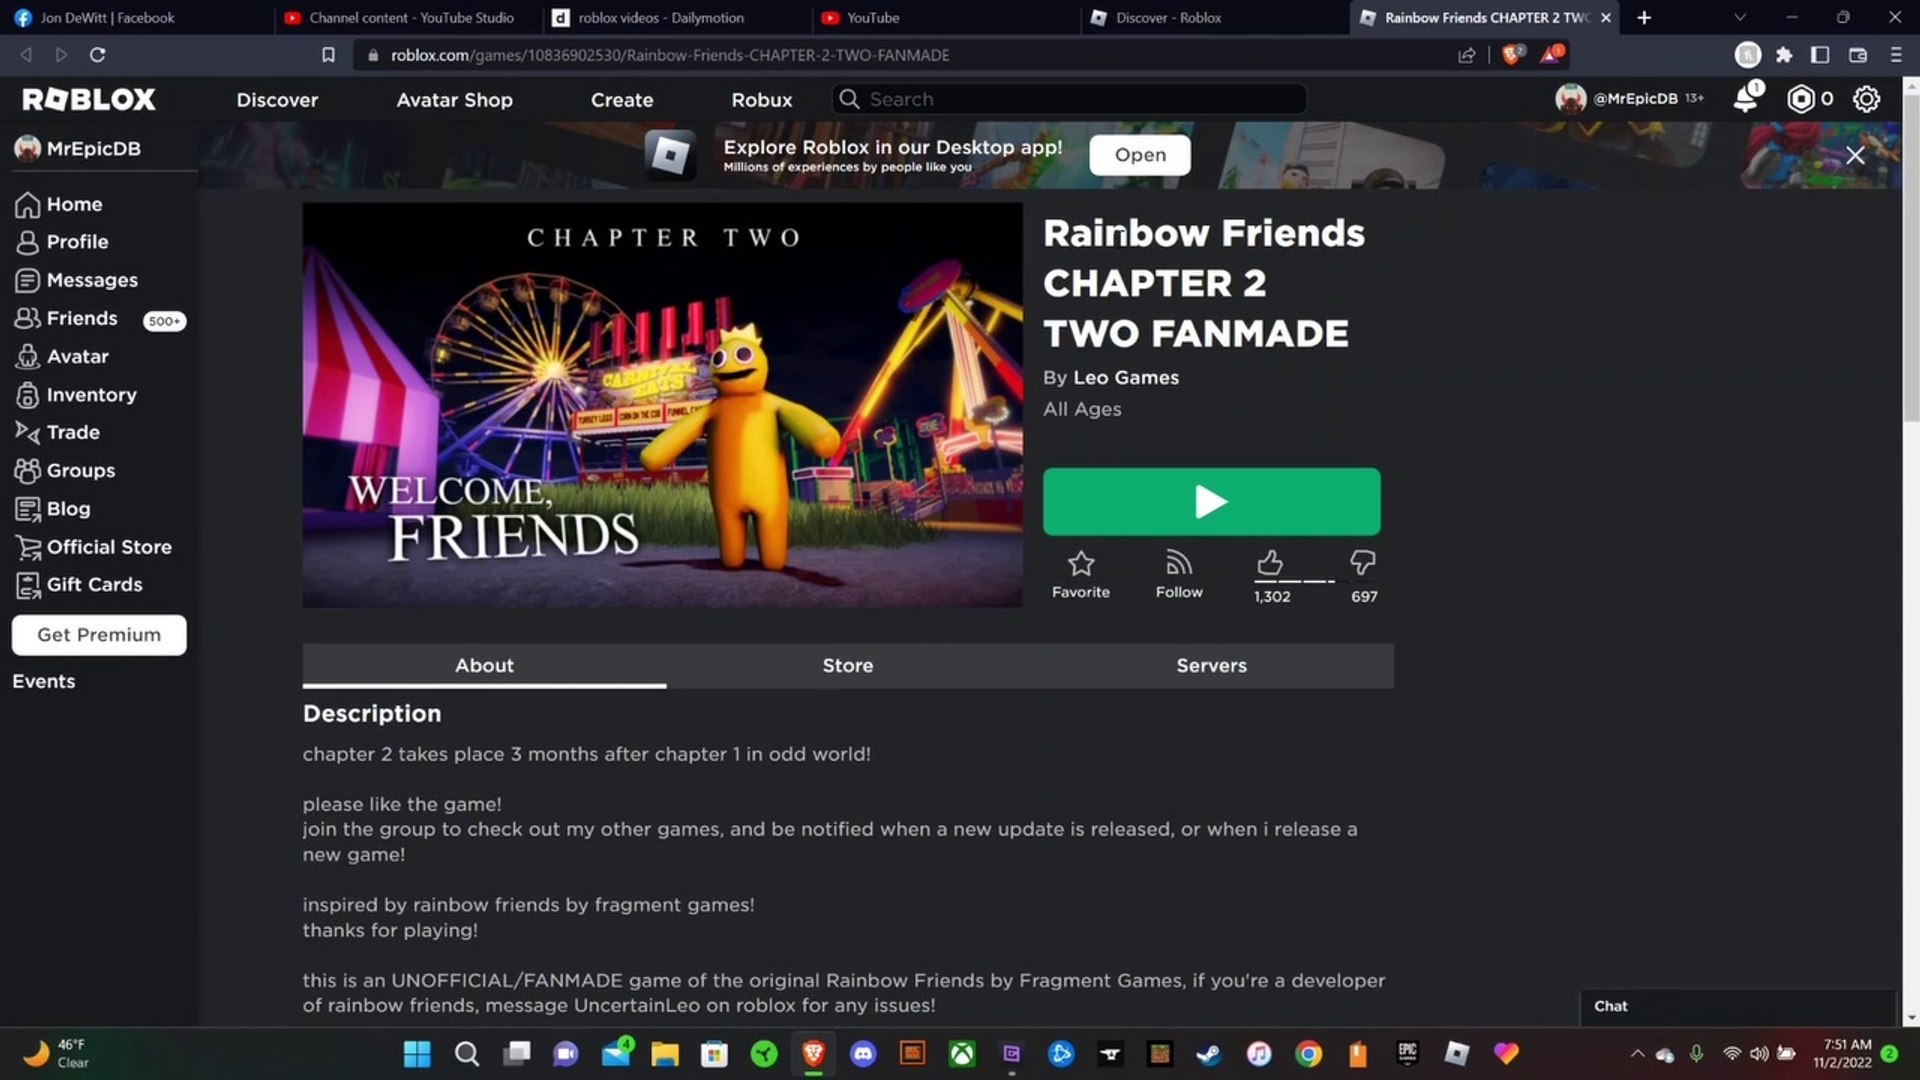 RoNews on X: The popular ROBLOX game Rainbow Friends chapter 2